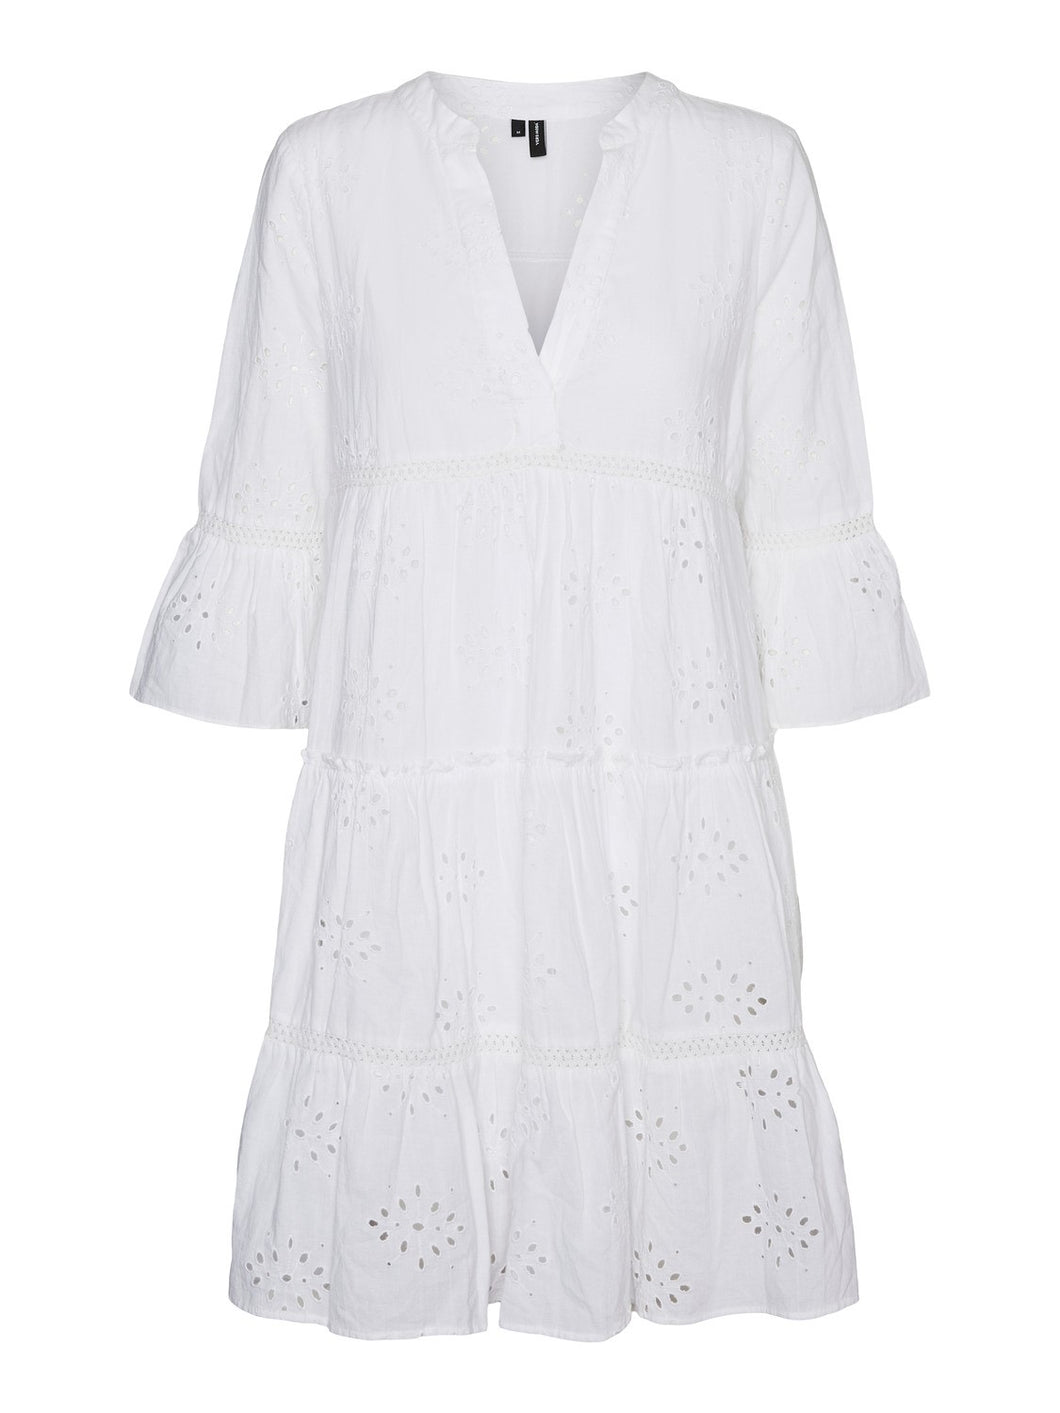 Dicthe Embroidery Tunic White